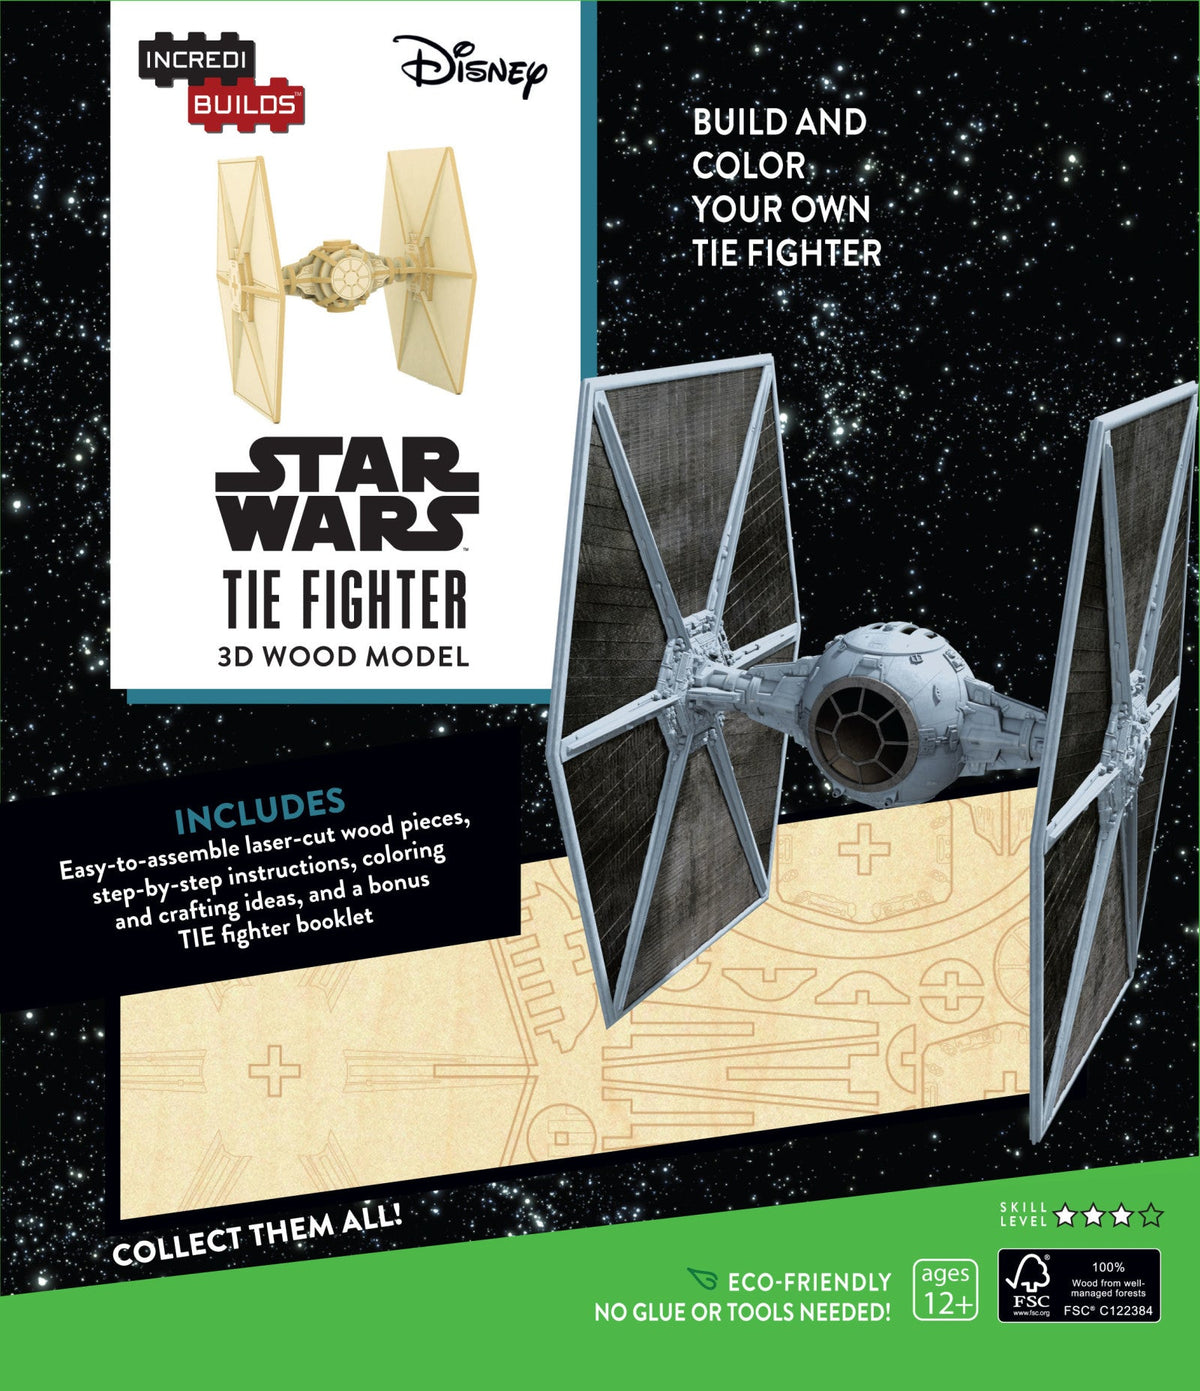 Incredibuilds Star Wars Rogue One Tie Fighter 3D Wood Model